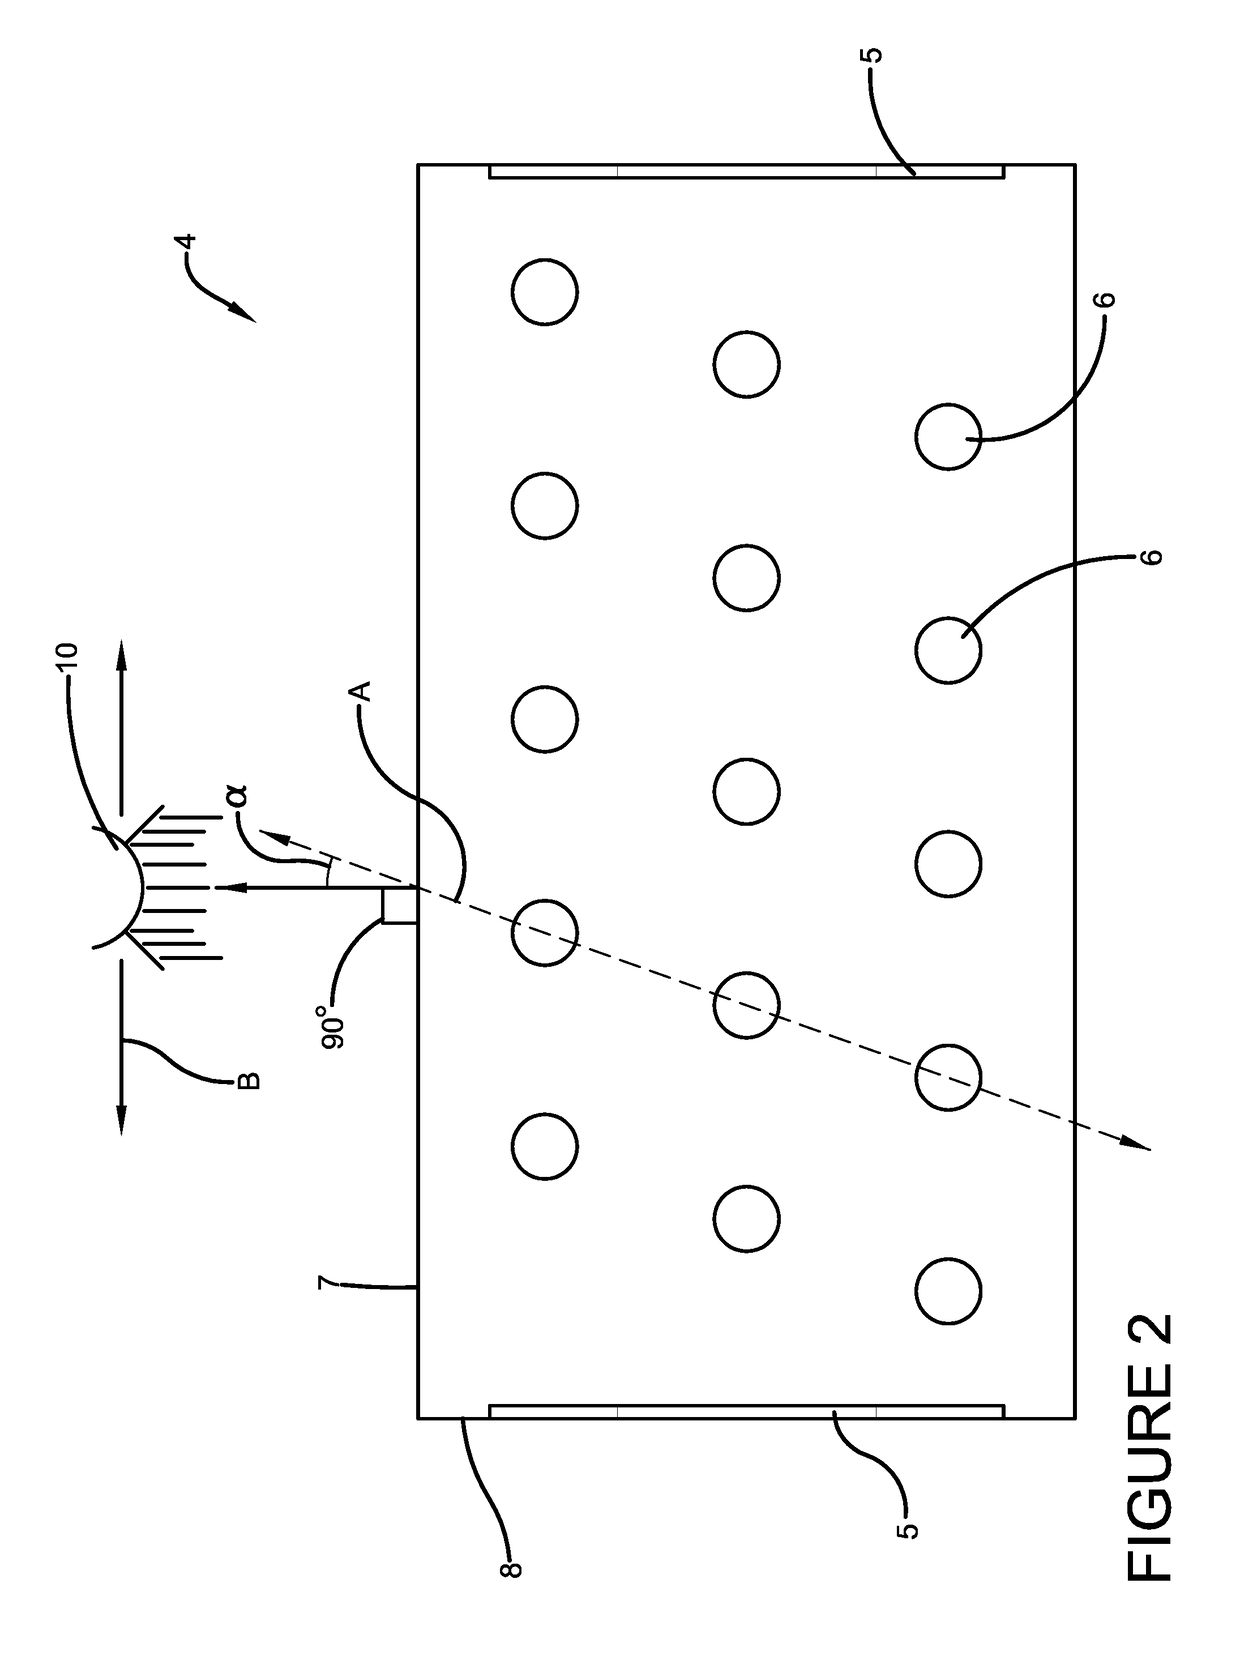 Method of Producing an Elongate Implant Containing a Structurally Encoded Pin Through Electrical Discharge Machining